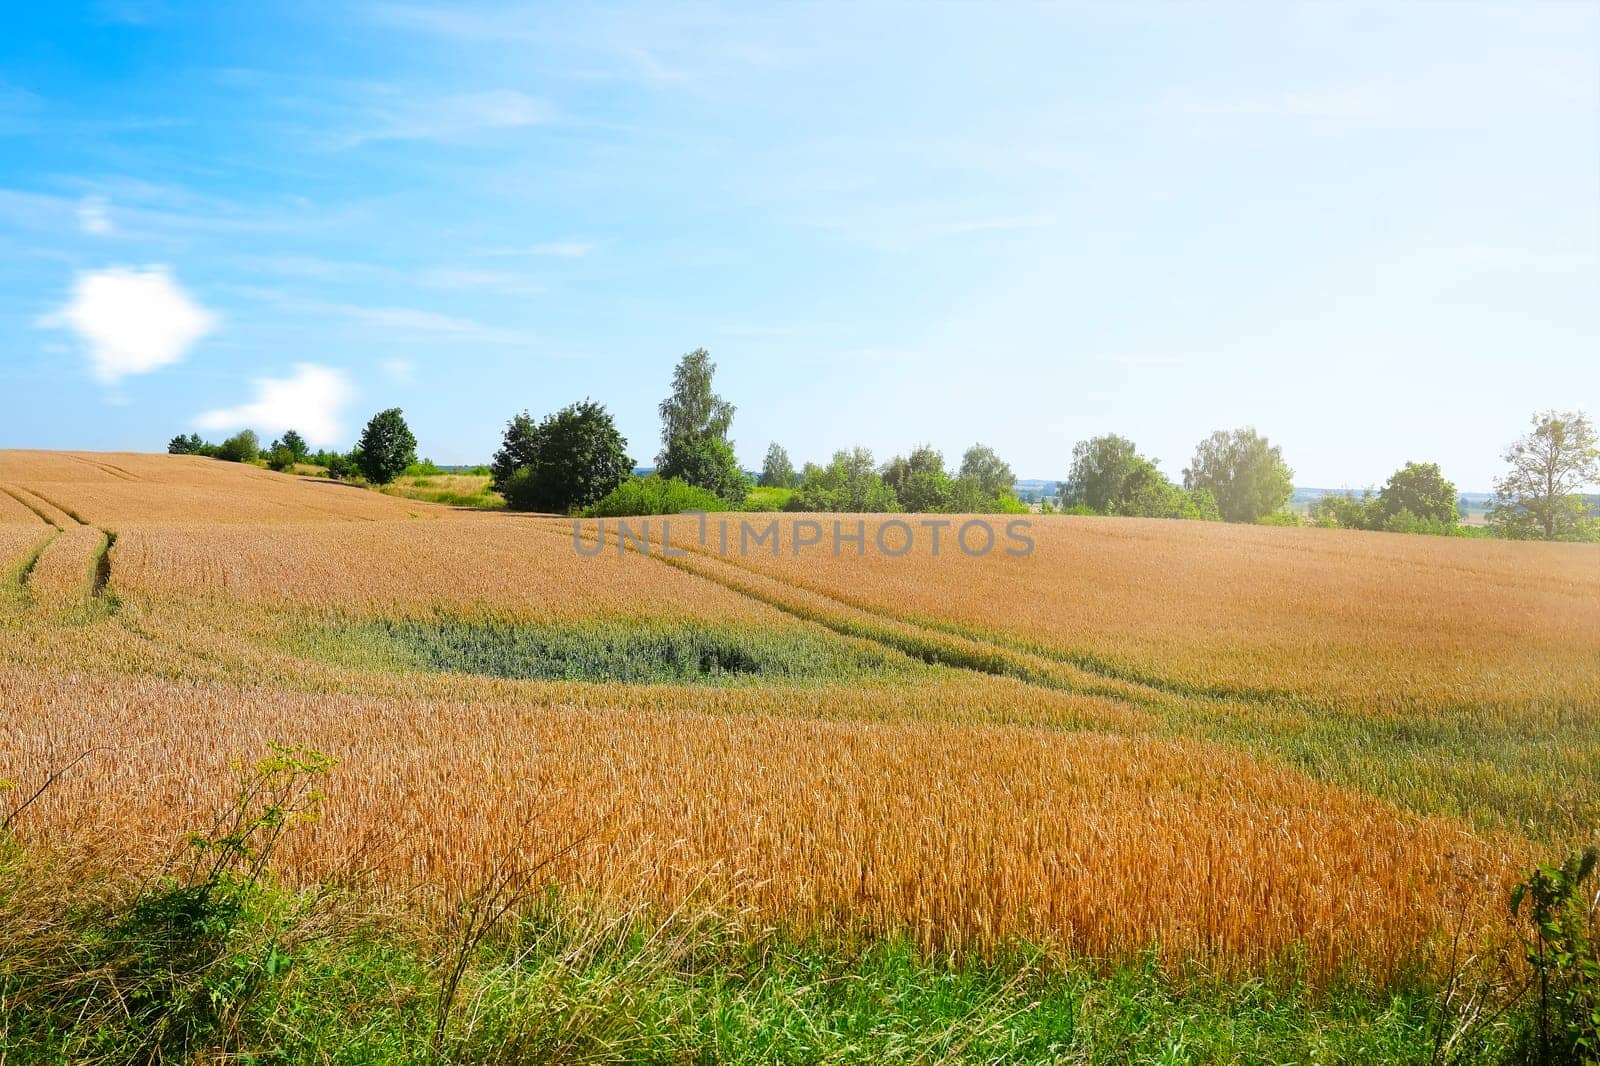 Serene Rural Landscape: Vibrant Golden Wheat Field with Blue Sky in Poland on a Summer Day by PhotoTime